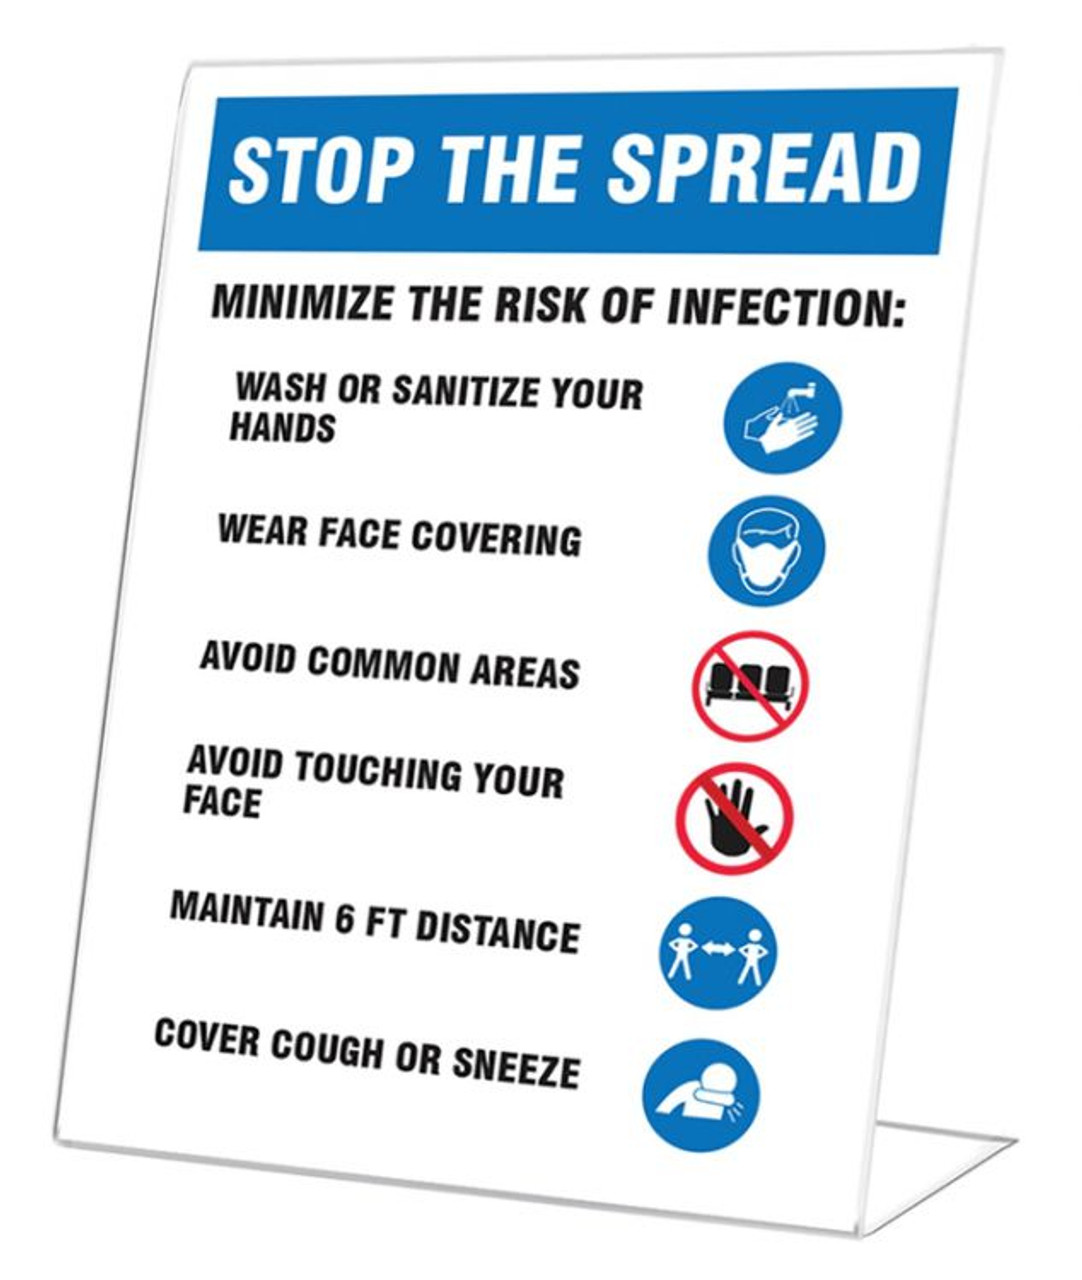 Countertop Signs, Stop The Spread: Minimize Infection, Wash Hands, Wear Mask, Avoid Common Areas, 10" x 7", Each